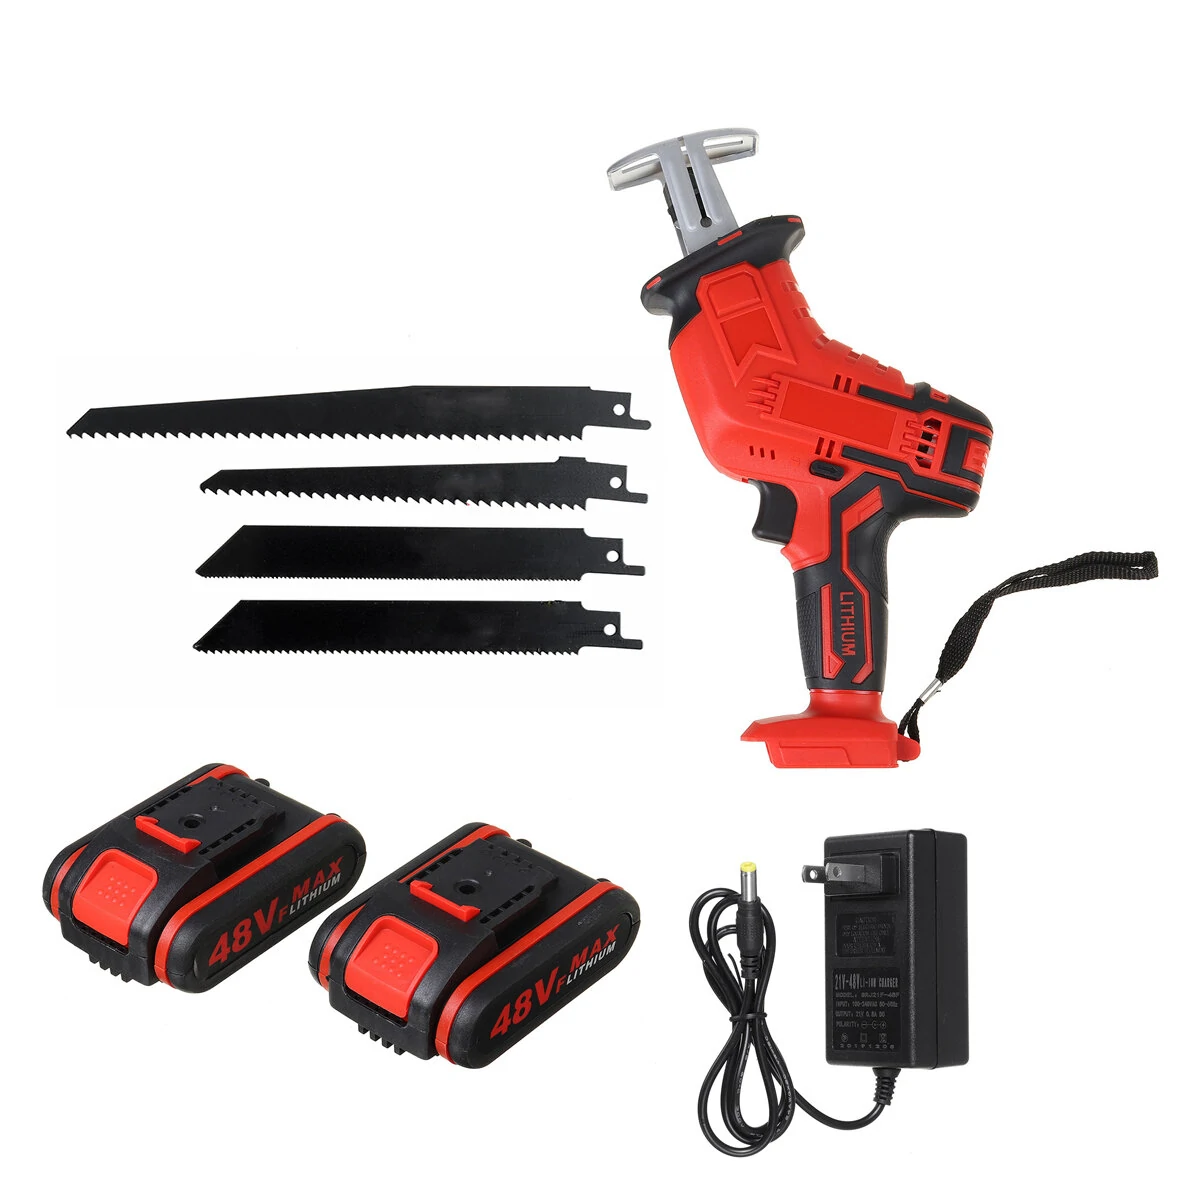 21V Cordless Reciprocating Saw Electric Saw W/ 4 Saw Blades Metal Cutting Woodworking W/ 1/2 Lithium Battery - Red Two Batteries